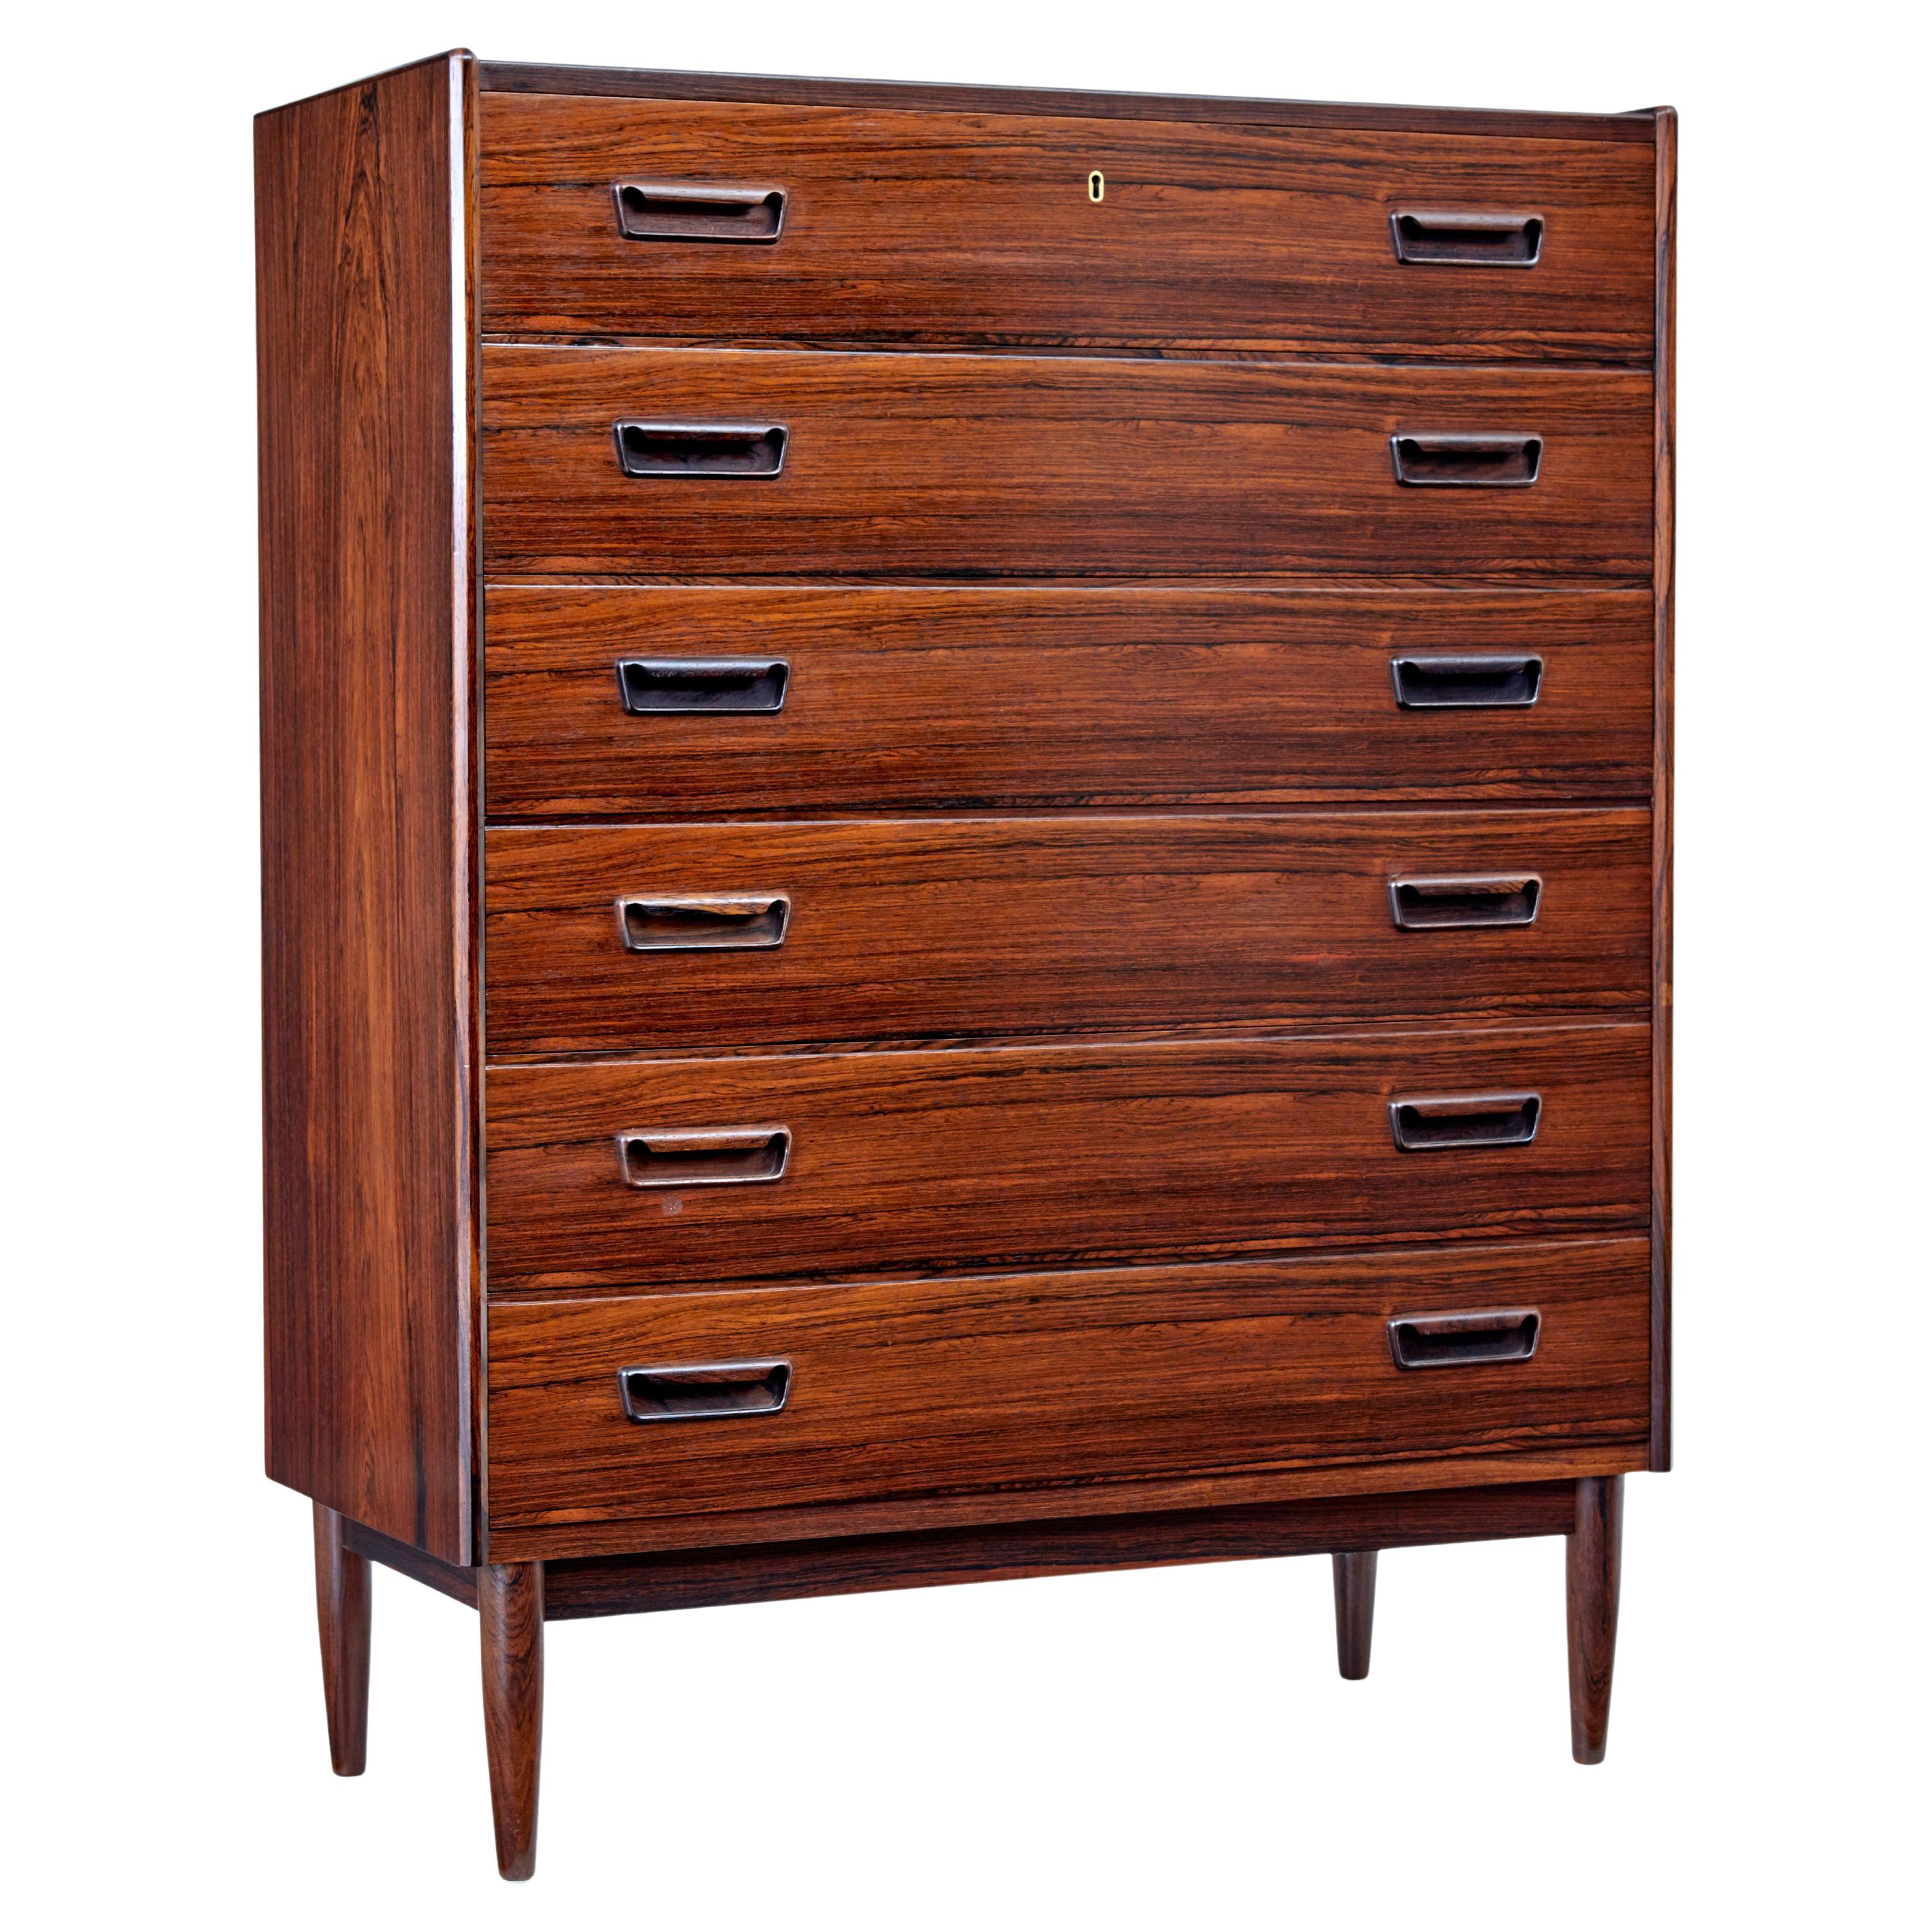 Mid-20th Century Palisander Tall Chest of Drawers For Sale